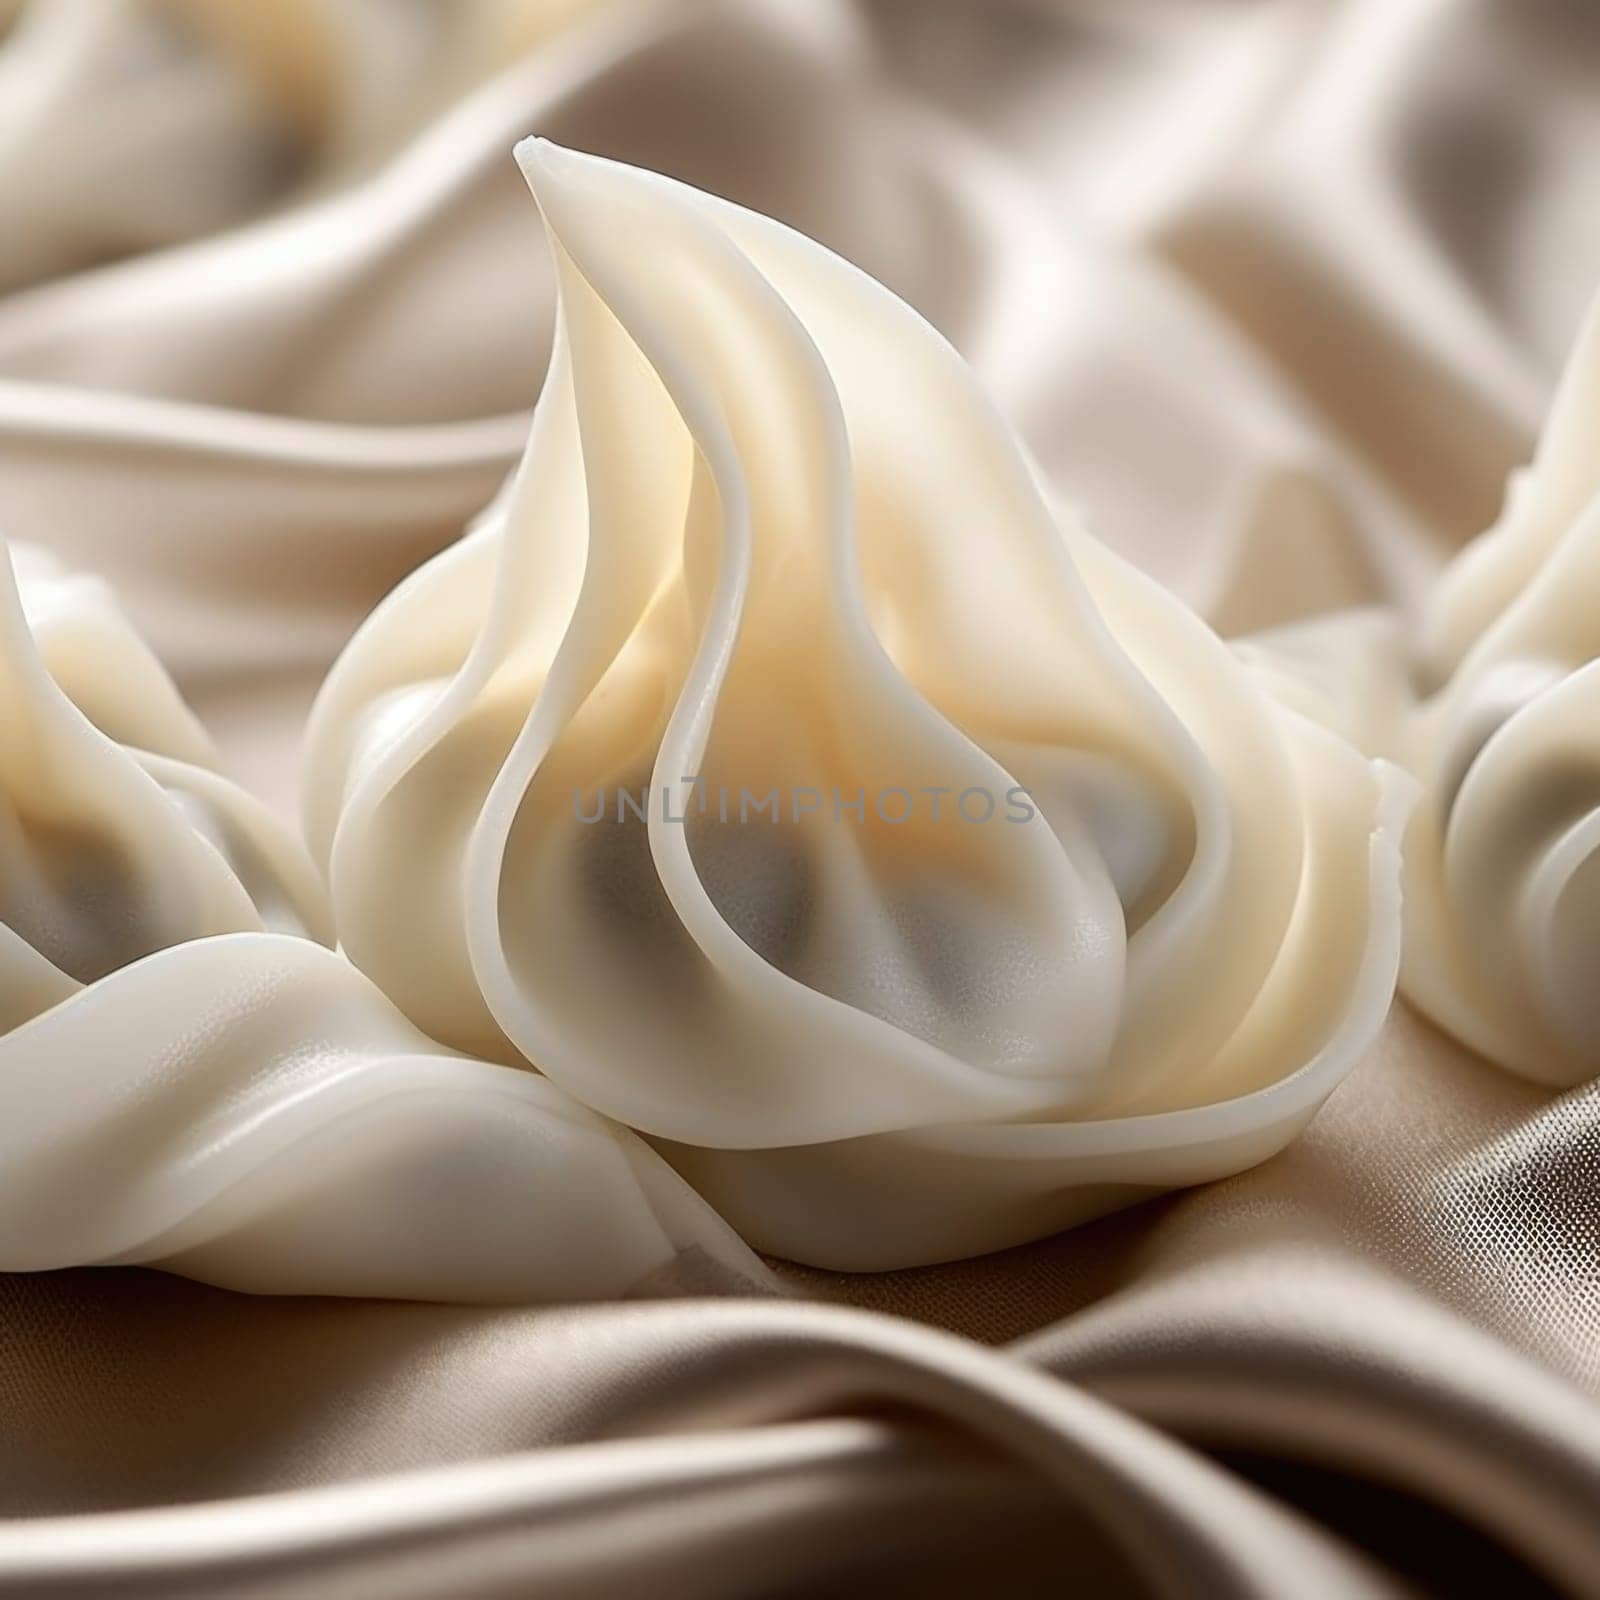 A close up of some white dumplings on a silk cloth, AI by starush